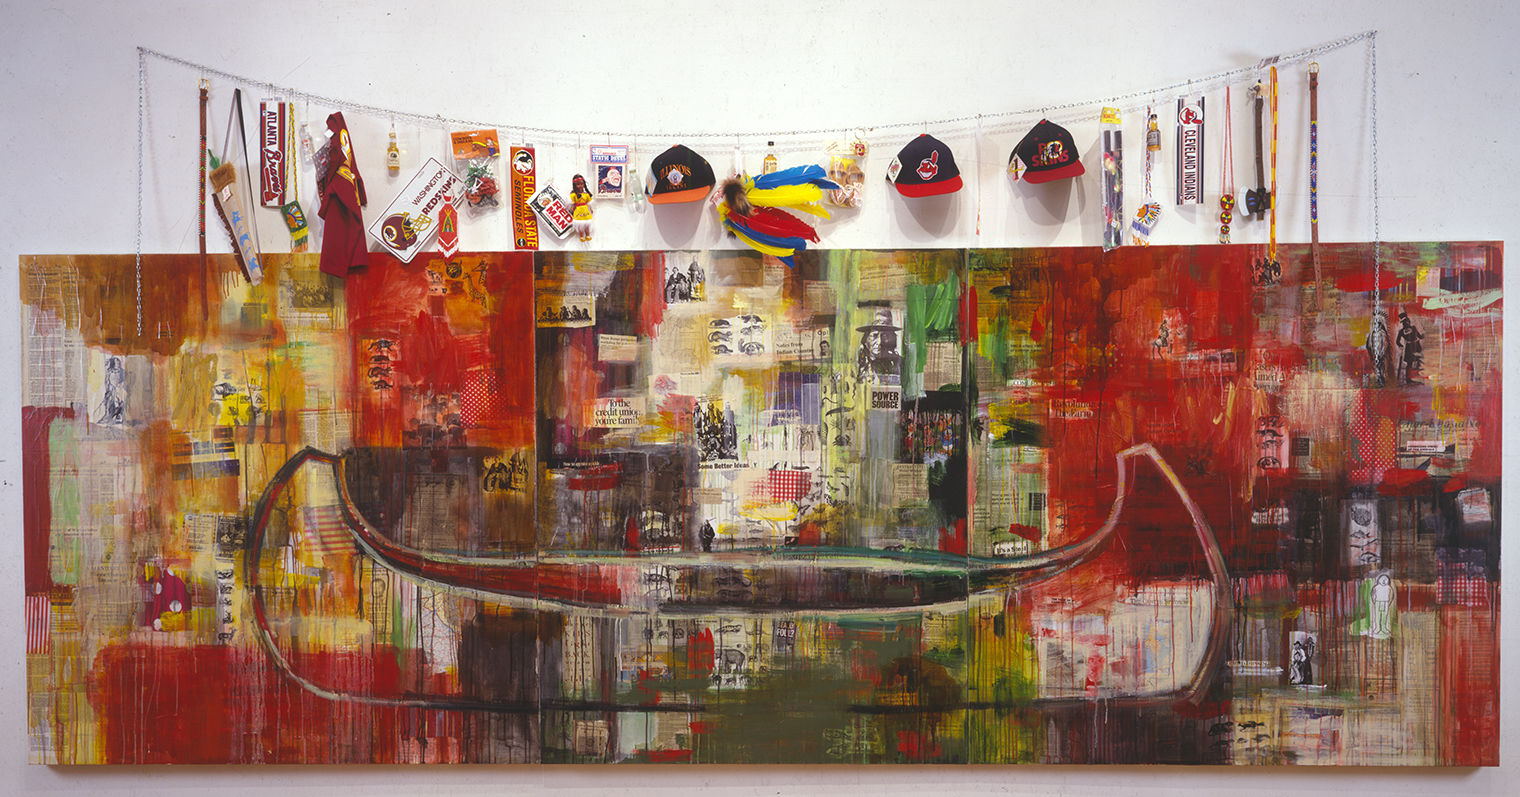 Mixed media artwork including a large-scale painting of a canoe. Anglo objects related to indigeneity in the US, such as a Washington Redskins baseball cap, are strung above the painting.